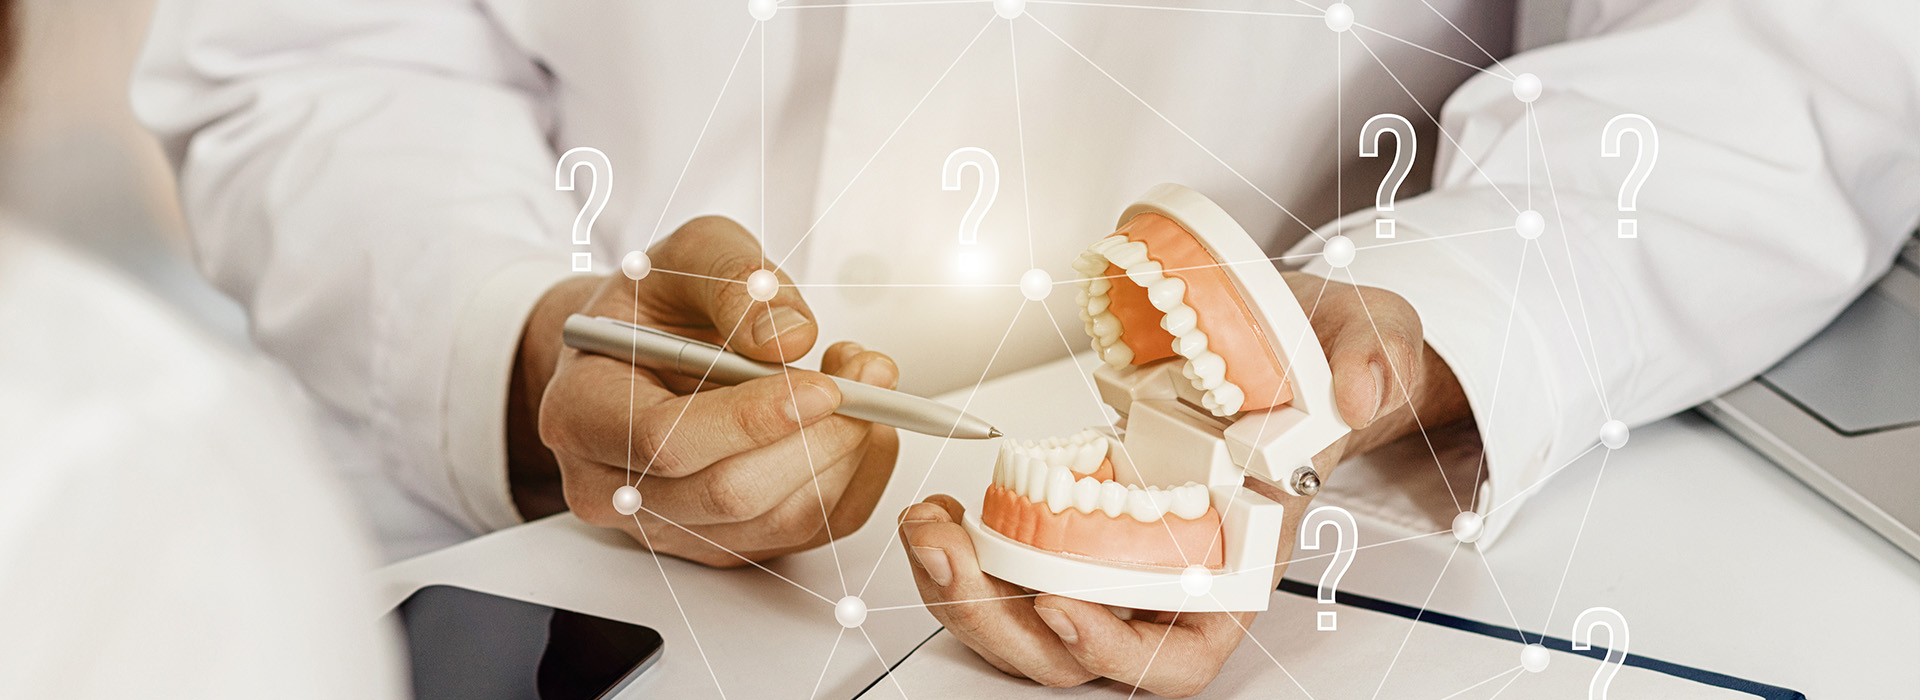 All About Smiles | Dentures, Extractions and Dental Bridges